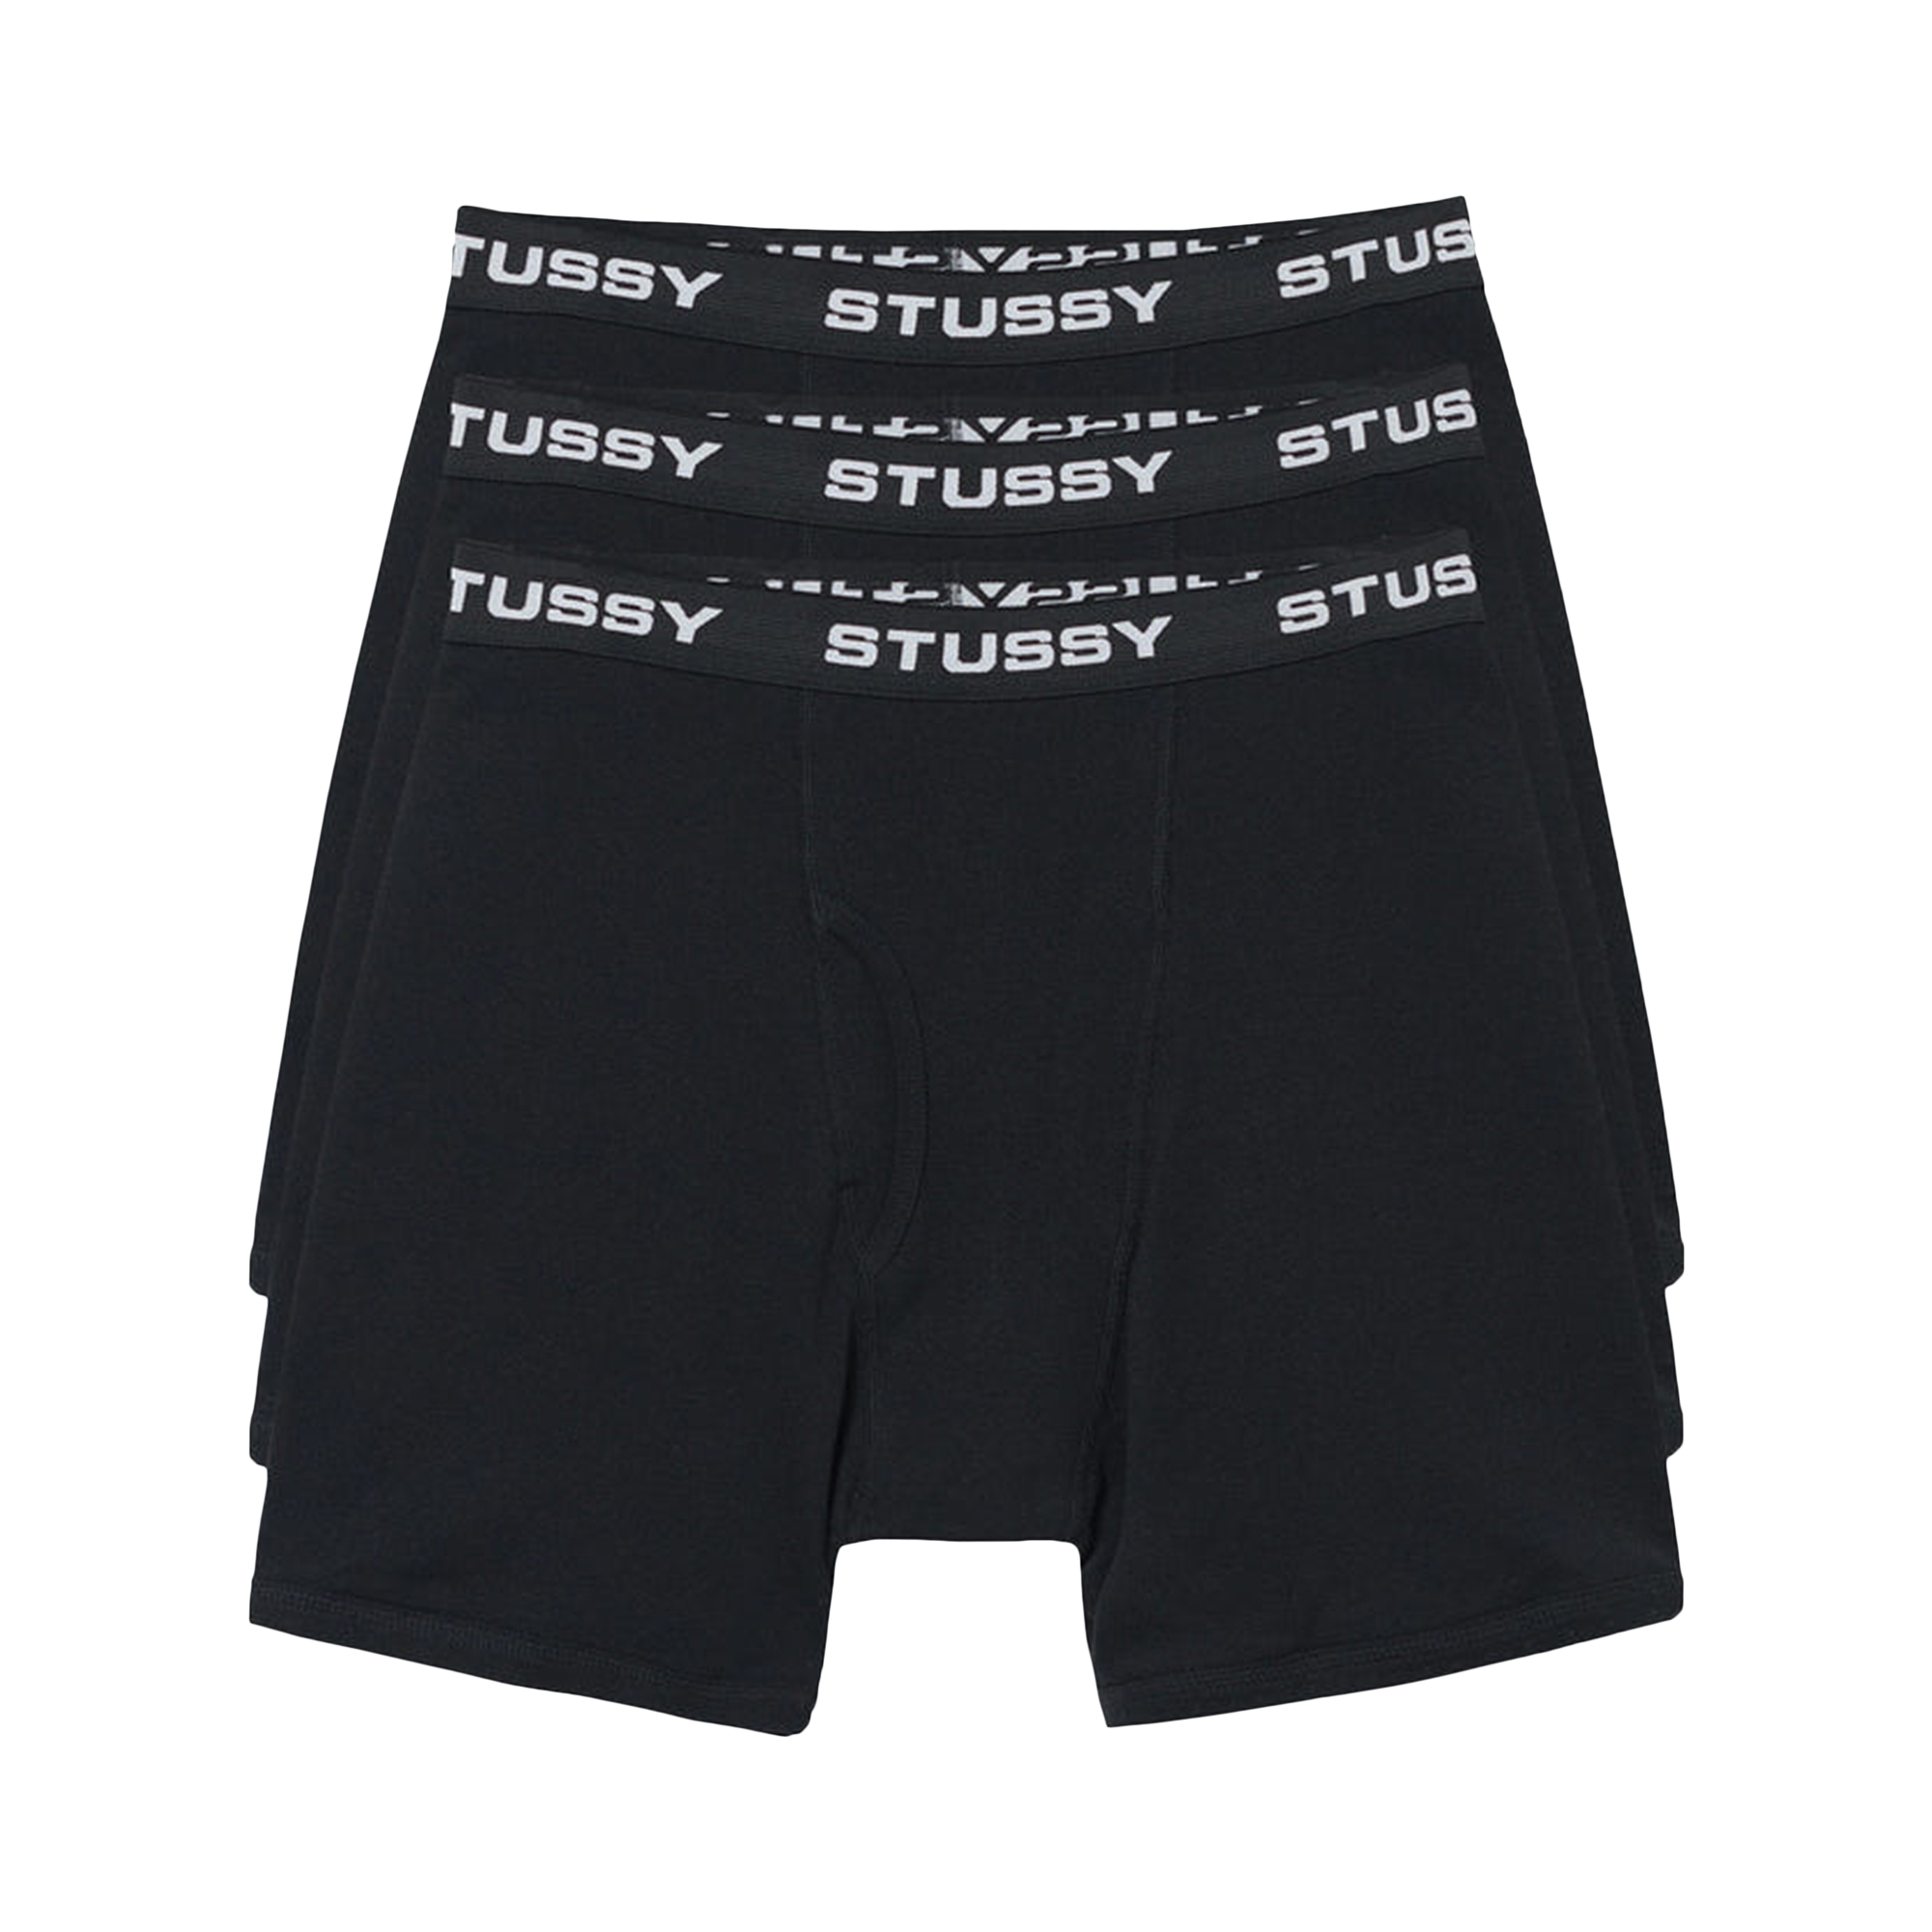 Pre-owned Stussy Boxer Briefs (3 Pack) 'black'